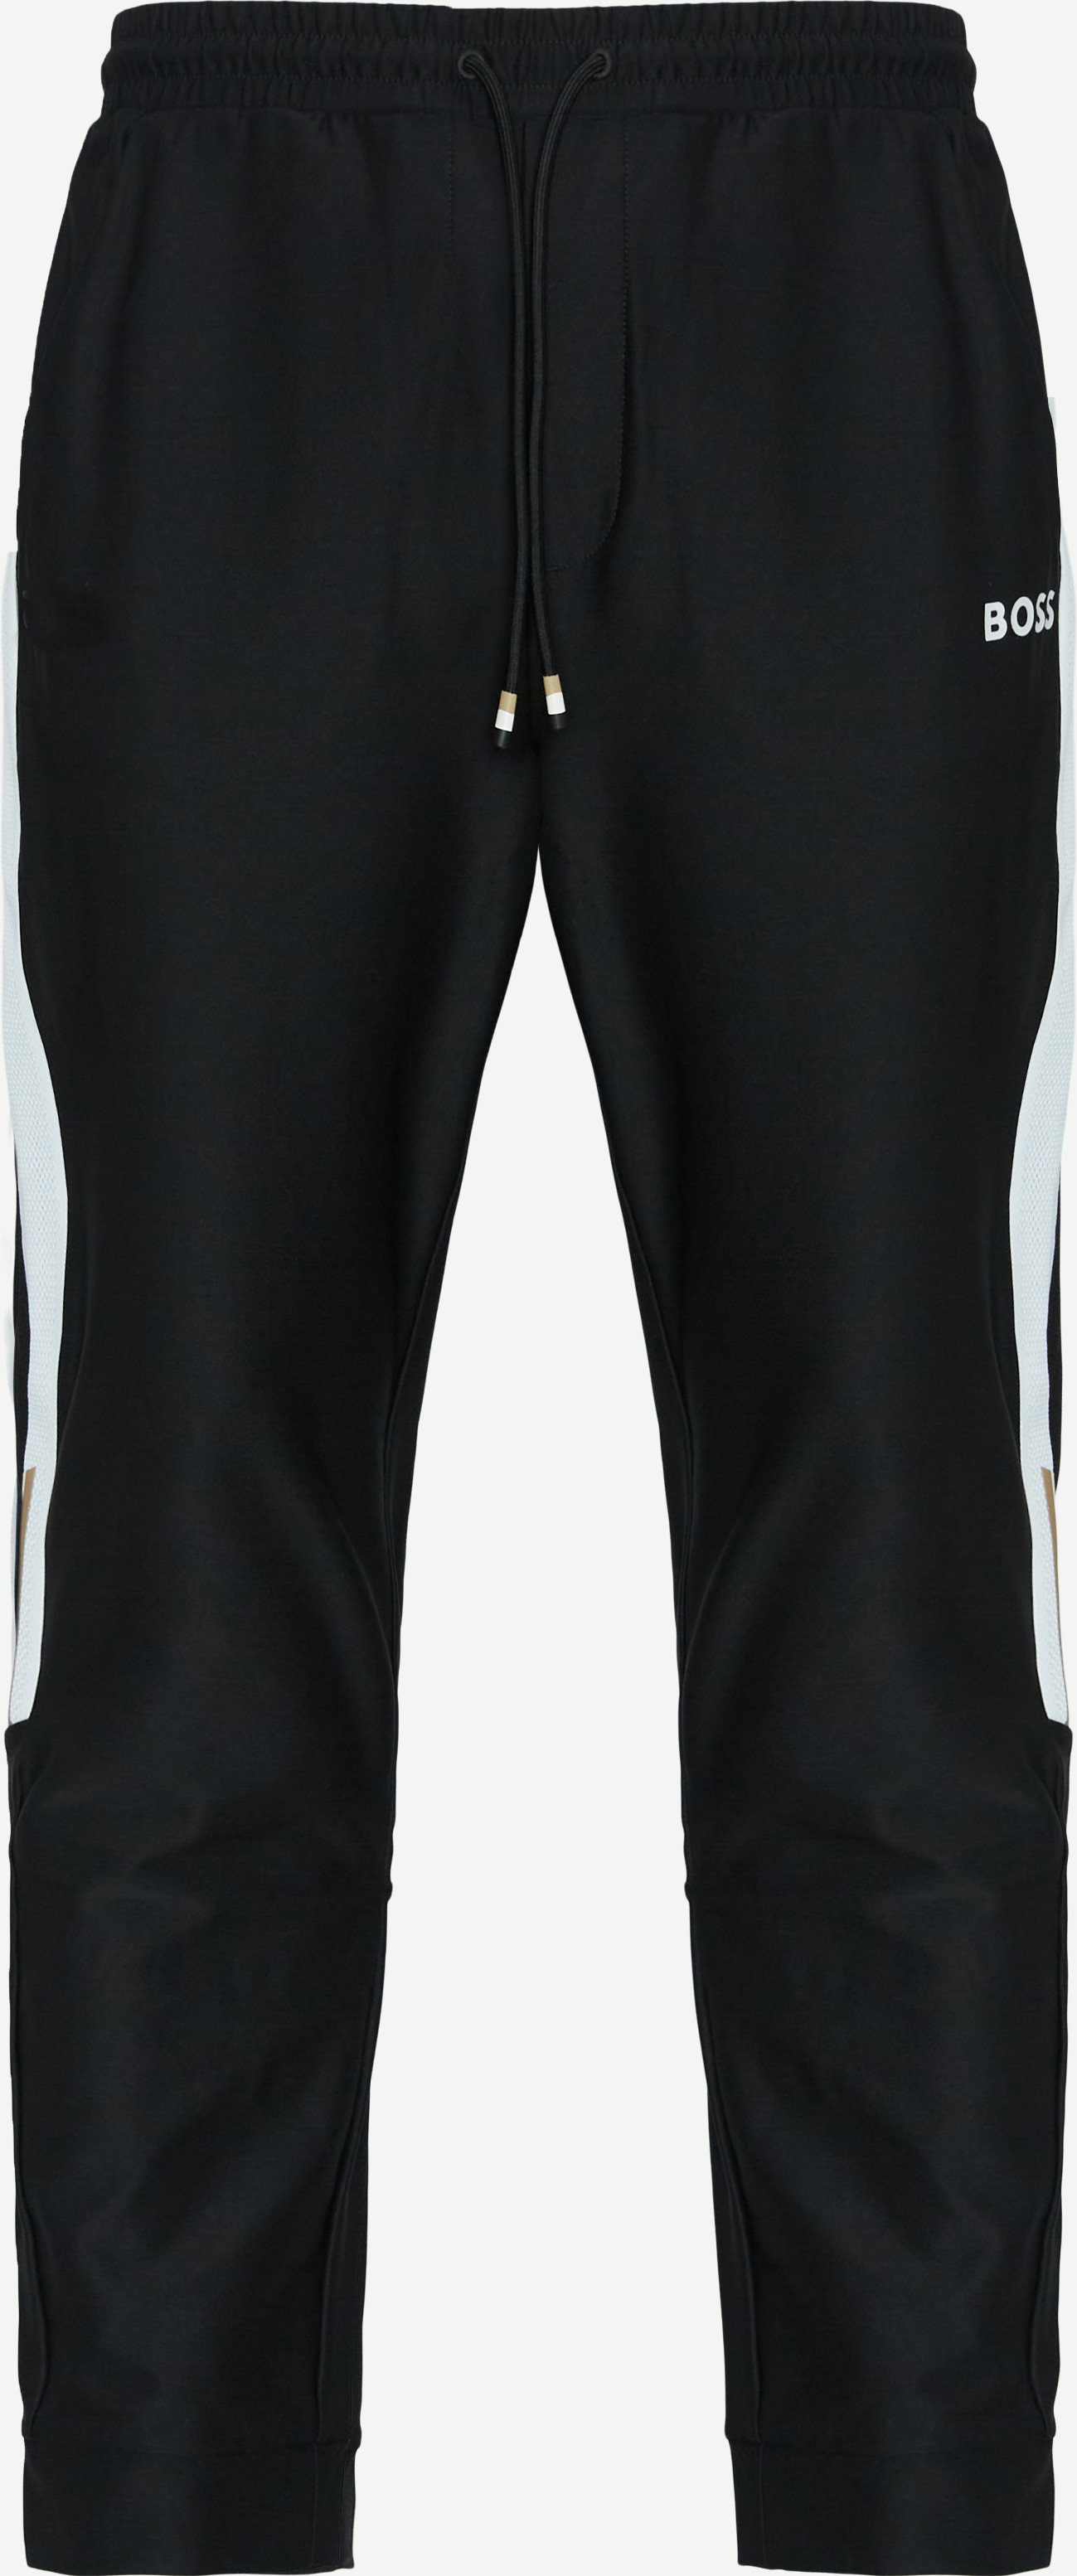 BOSS Athleisure Trousers 50506163 HICON MB 2 Black